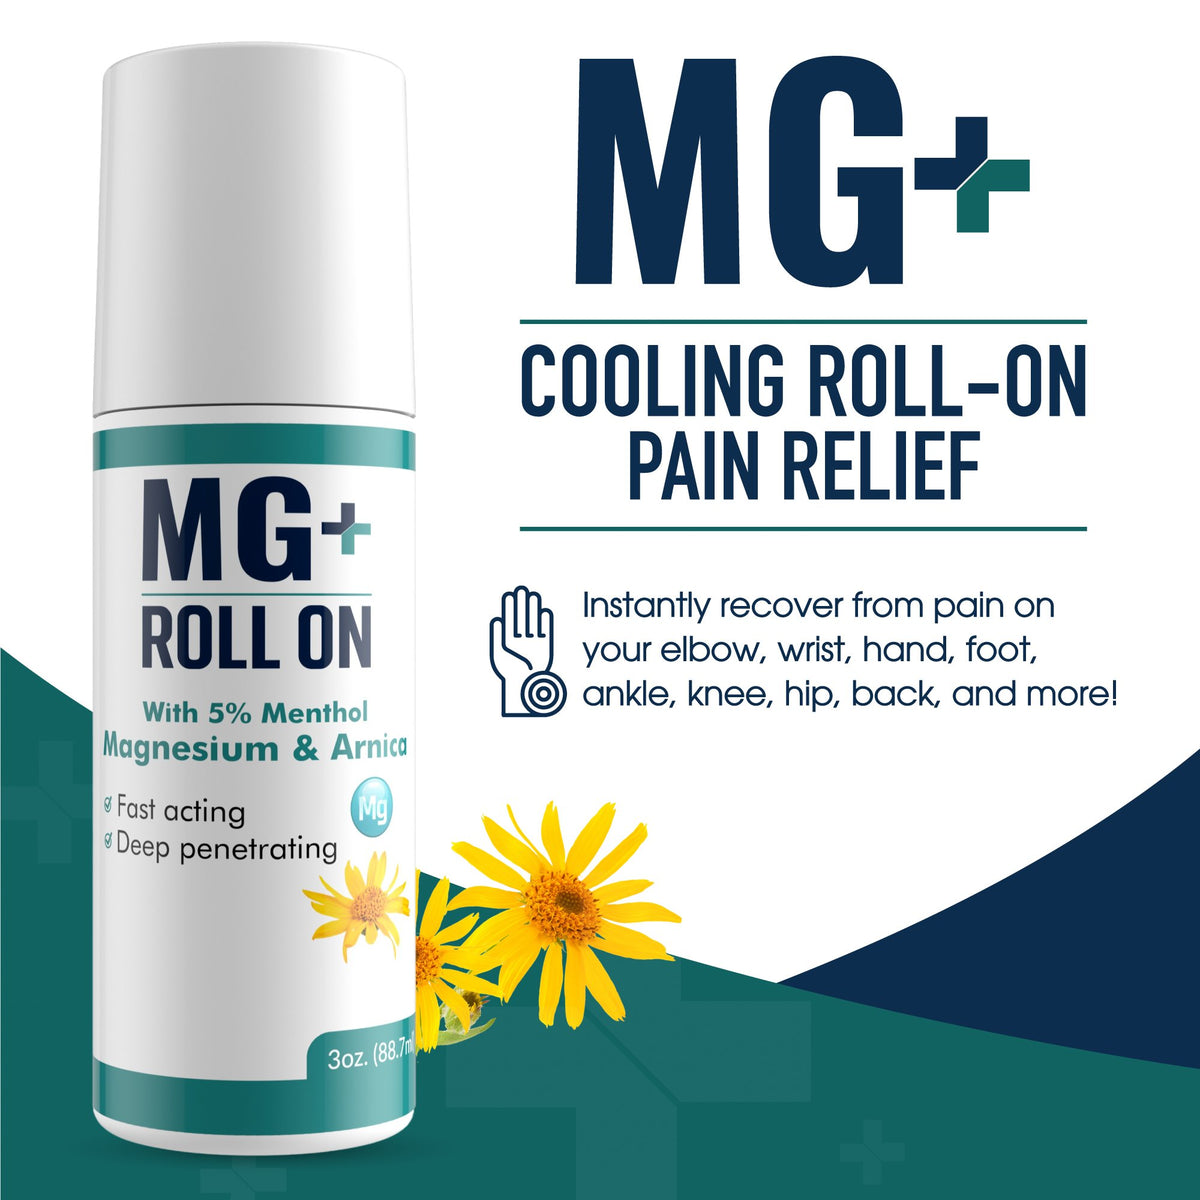 Mars Wellness MG+ Cooling Roll on Pain Relief (3 oz) – Fast Acting Arnica Roll on 5% Menthol Magnesium & Arnica – Penetrating Menthol Pain Relief Roll On Topical Pain Relief, Aches, Sore Muscle Pain